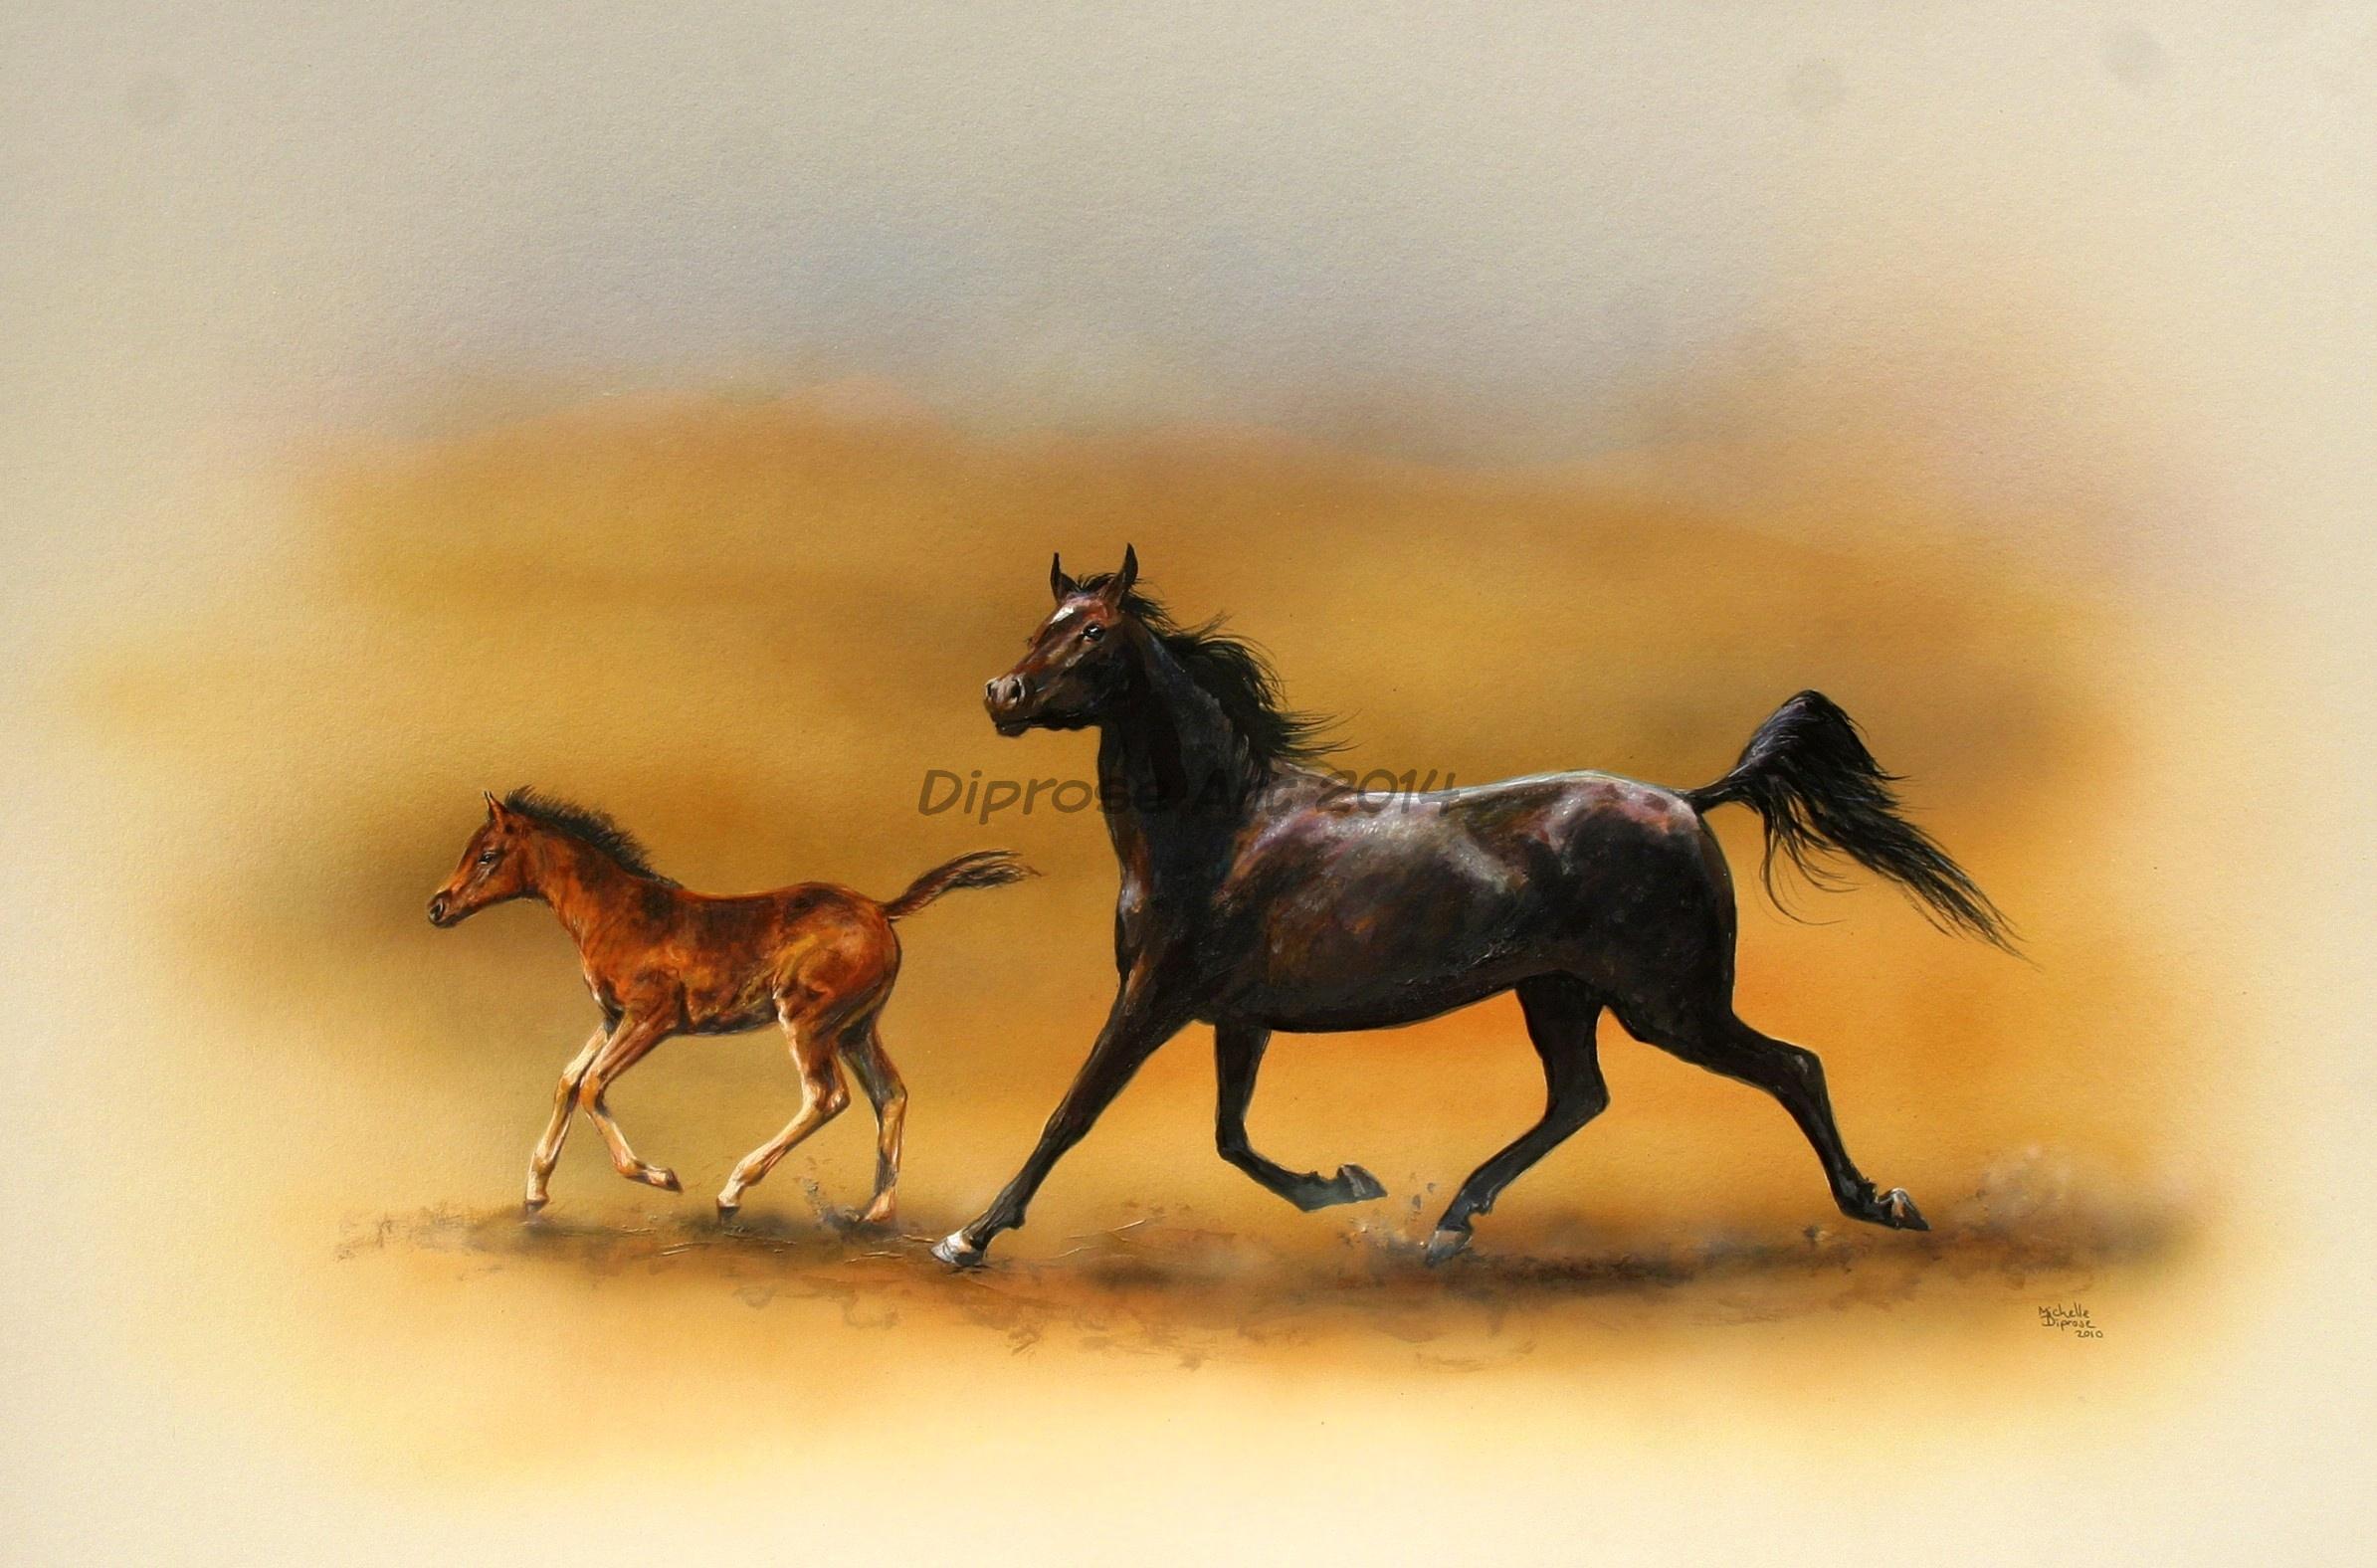 Acrylics on board - approx A1 - horse portraits - Usually I work ion a commission basis but I did this painting just because I wanted to after seeing these two running about a field.  Black is rare in Arabians and I thought the mare was beautiful.